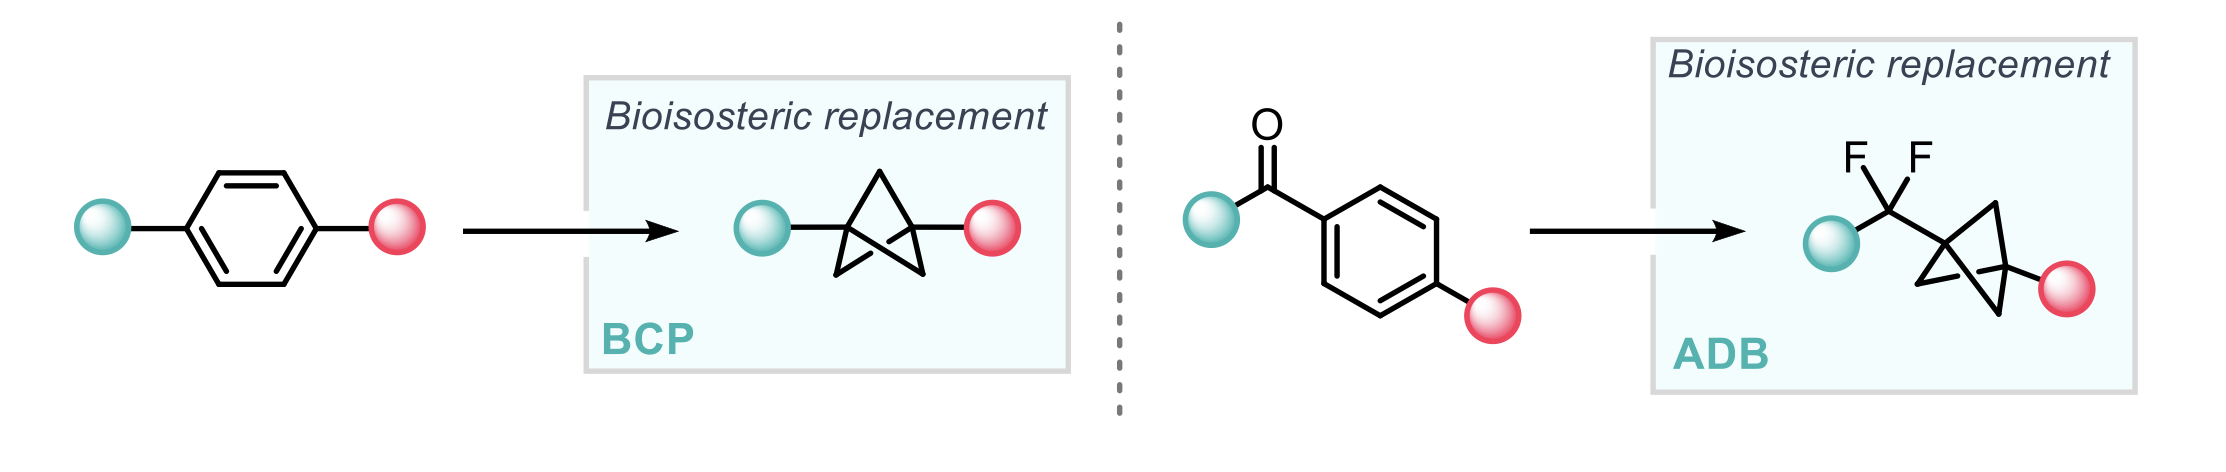 Small-ring cage hydrocarbons (such as bicyclo- [1.1.1]pentane (BCP)) remain a popular bioisostere for benzene rings. Whilst, Zhang and co-workers report the use of difluoromethyl BCP arenes as a replacement for a benzoyl group.